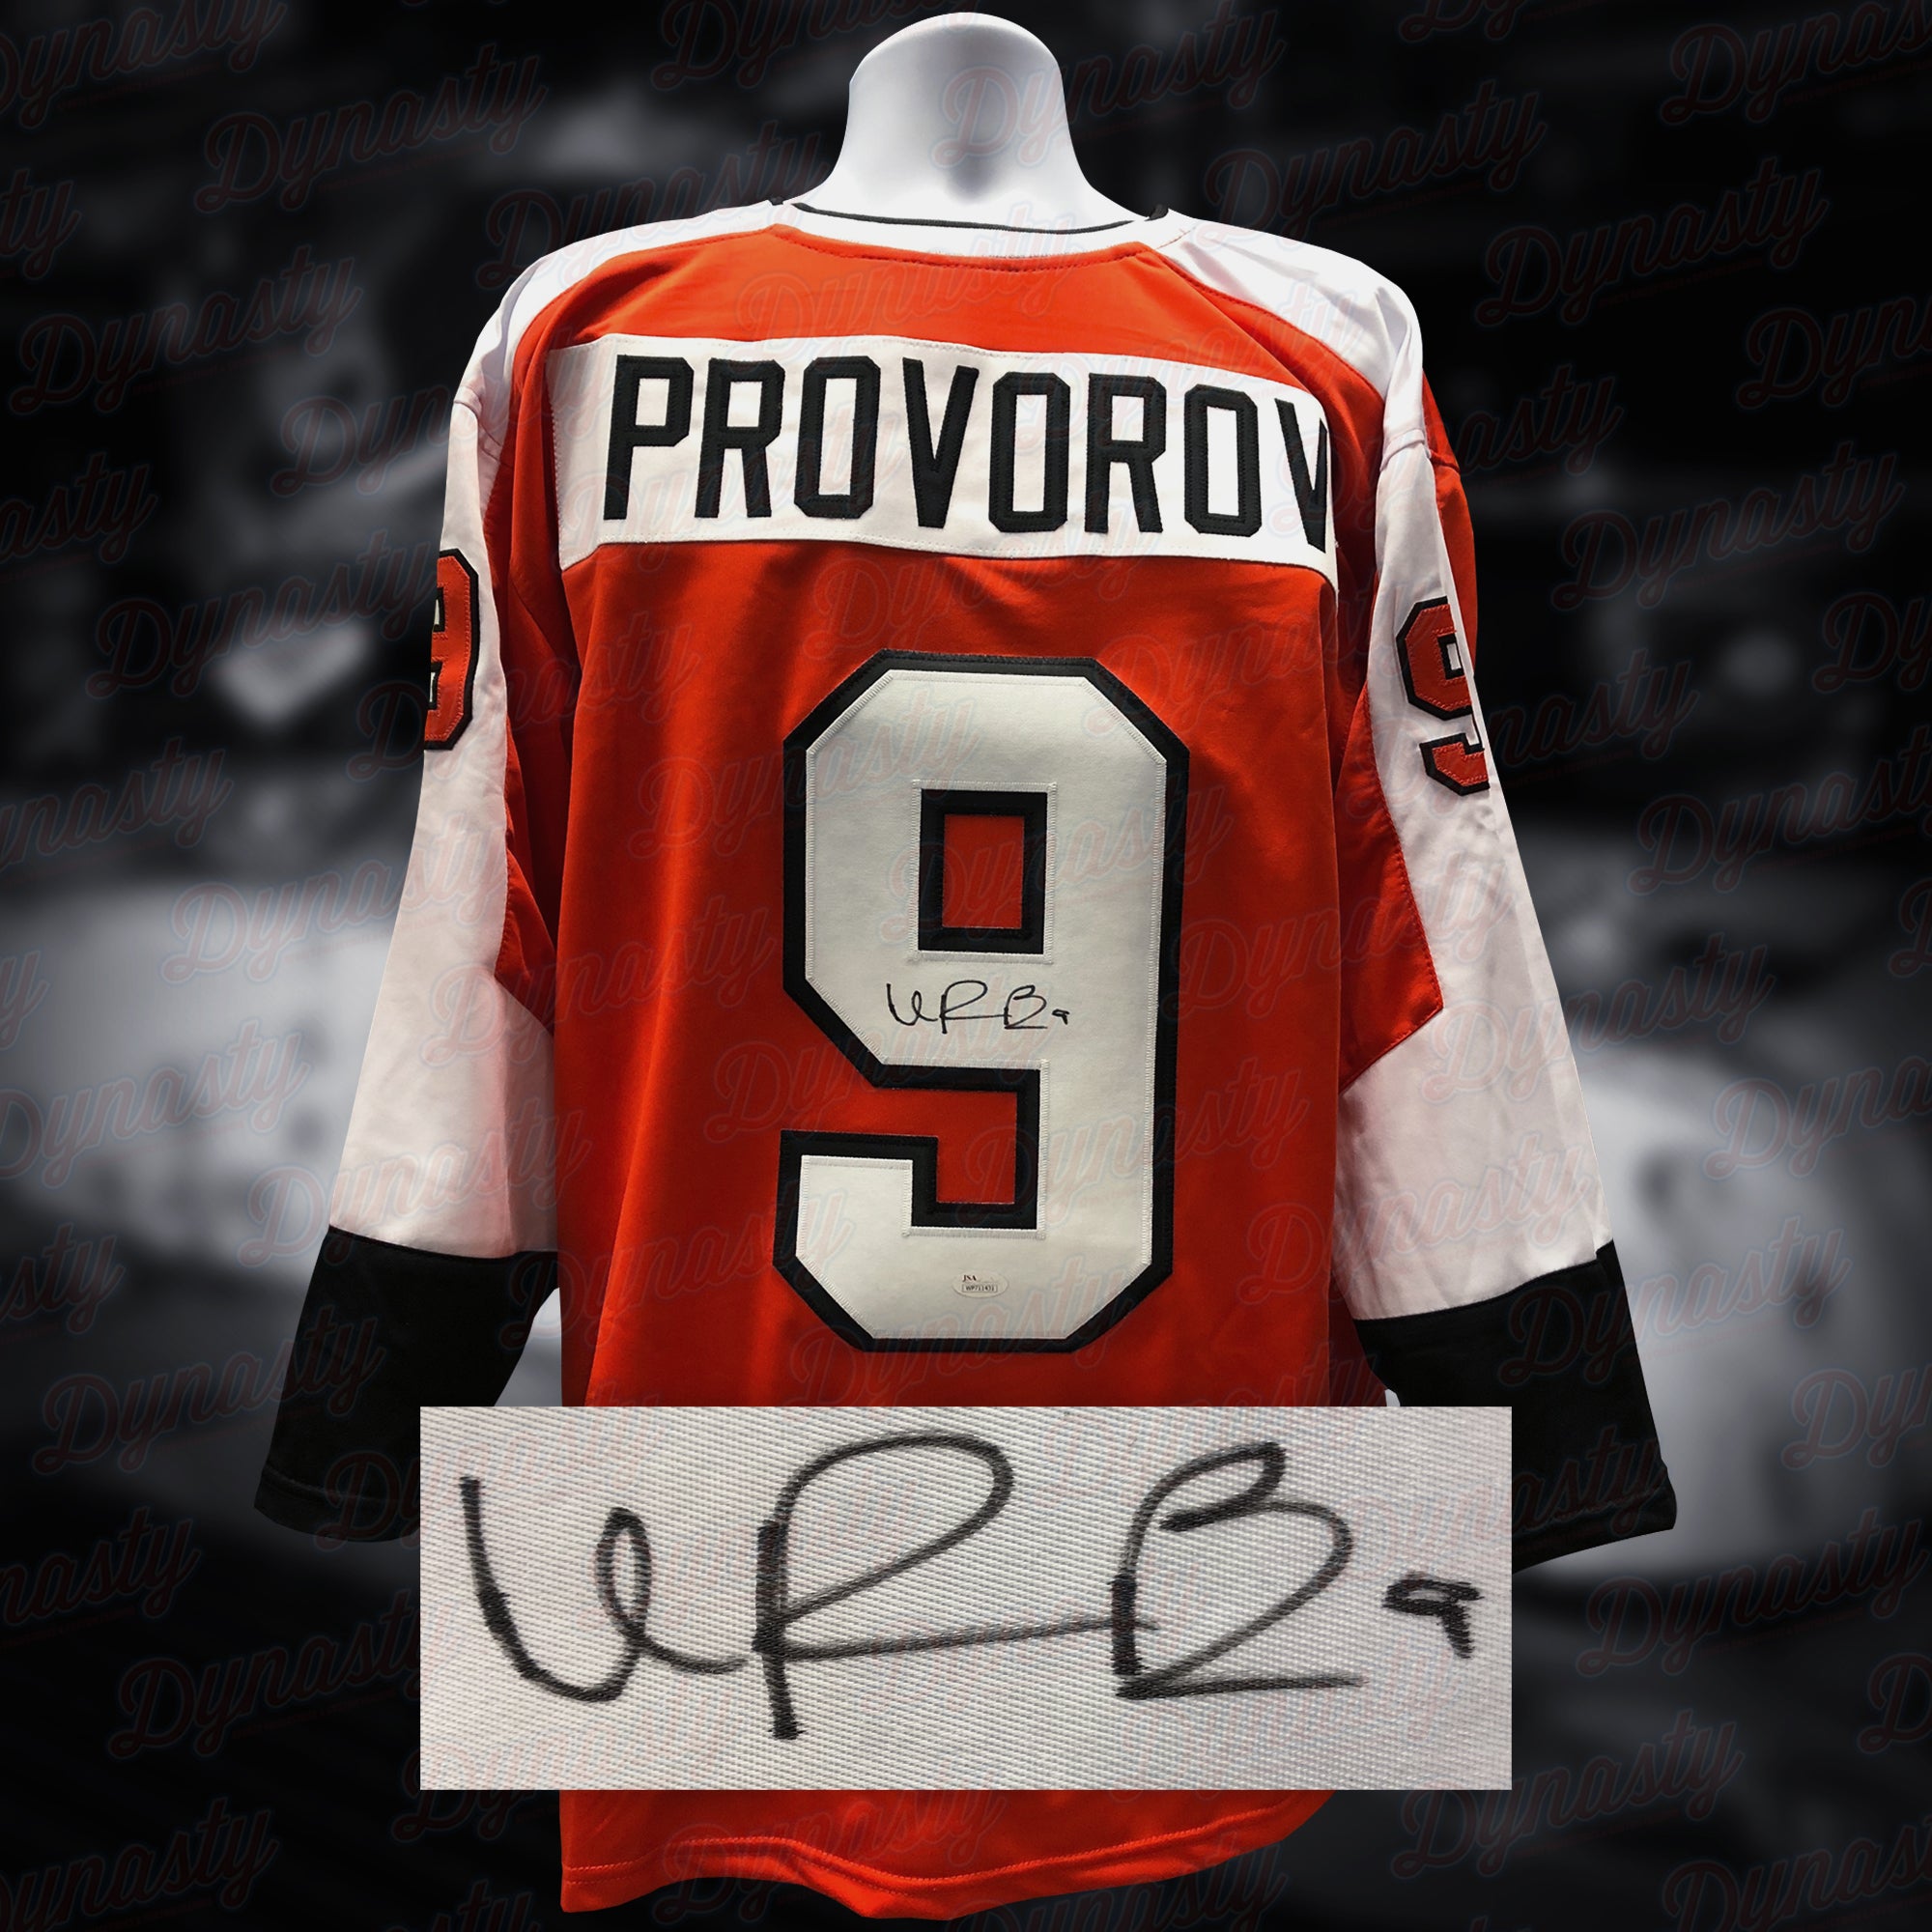 Philadelphia Flyers Signed Jerseys, Collectible Flyers Jerseys, Philadelphia  Flyers Memorabilia Jerseys